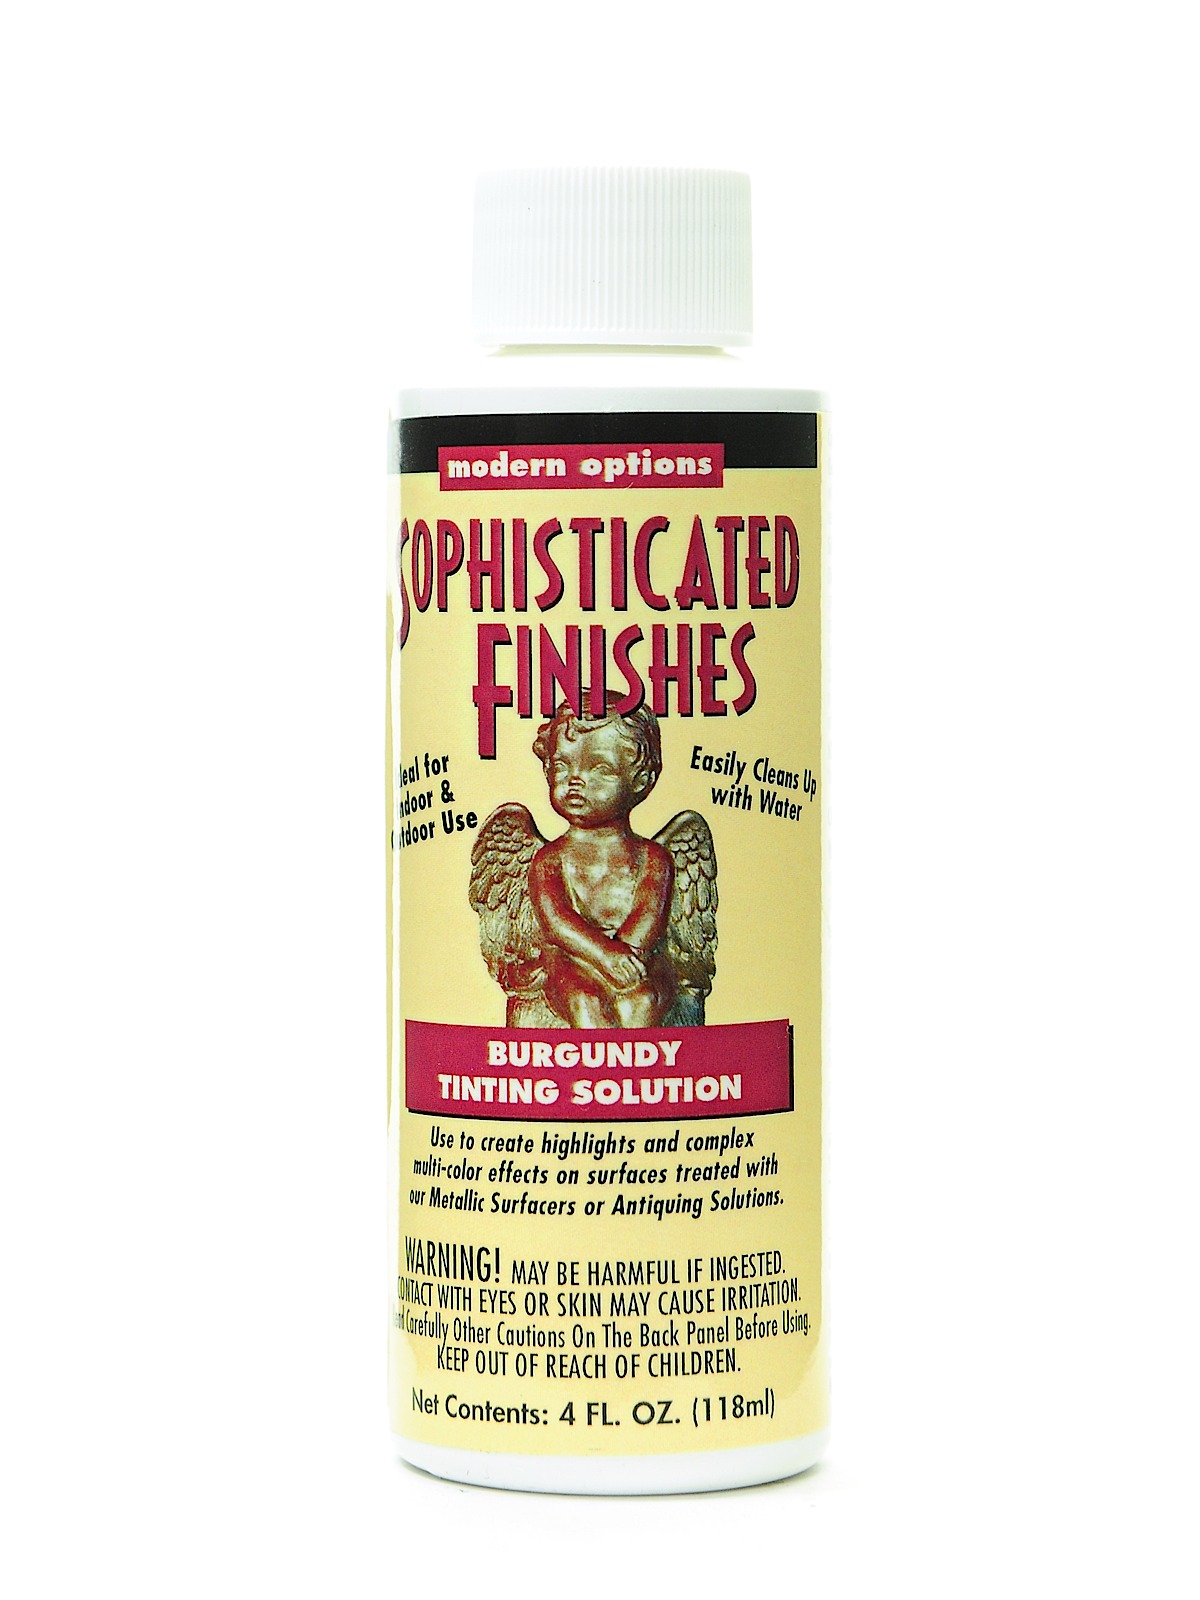 Sophisticated Finishes Antiquing Solutions Burgundy Tint 4 Oz.